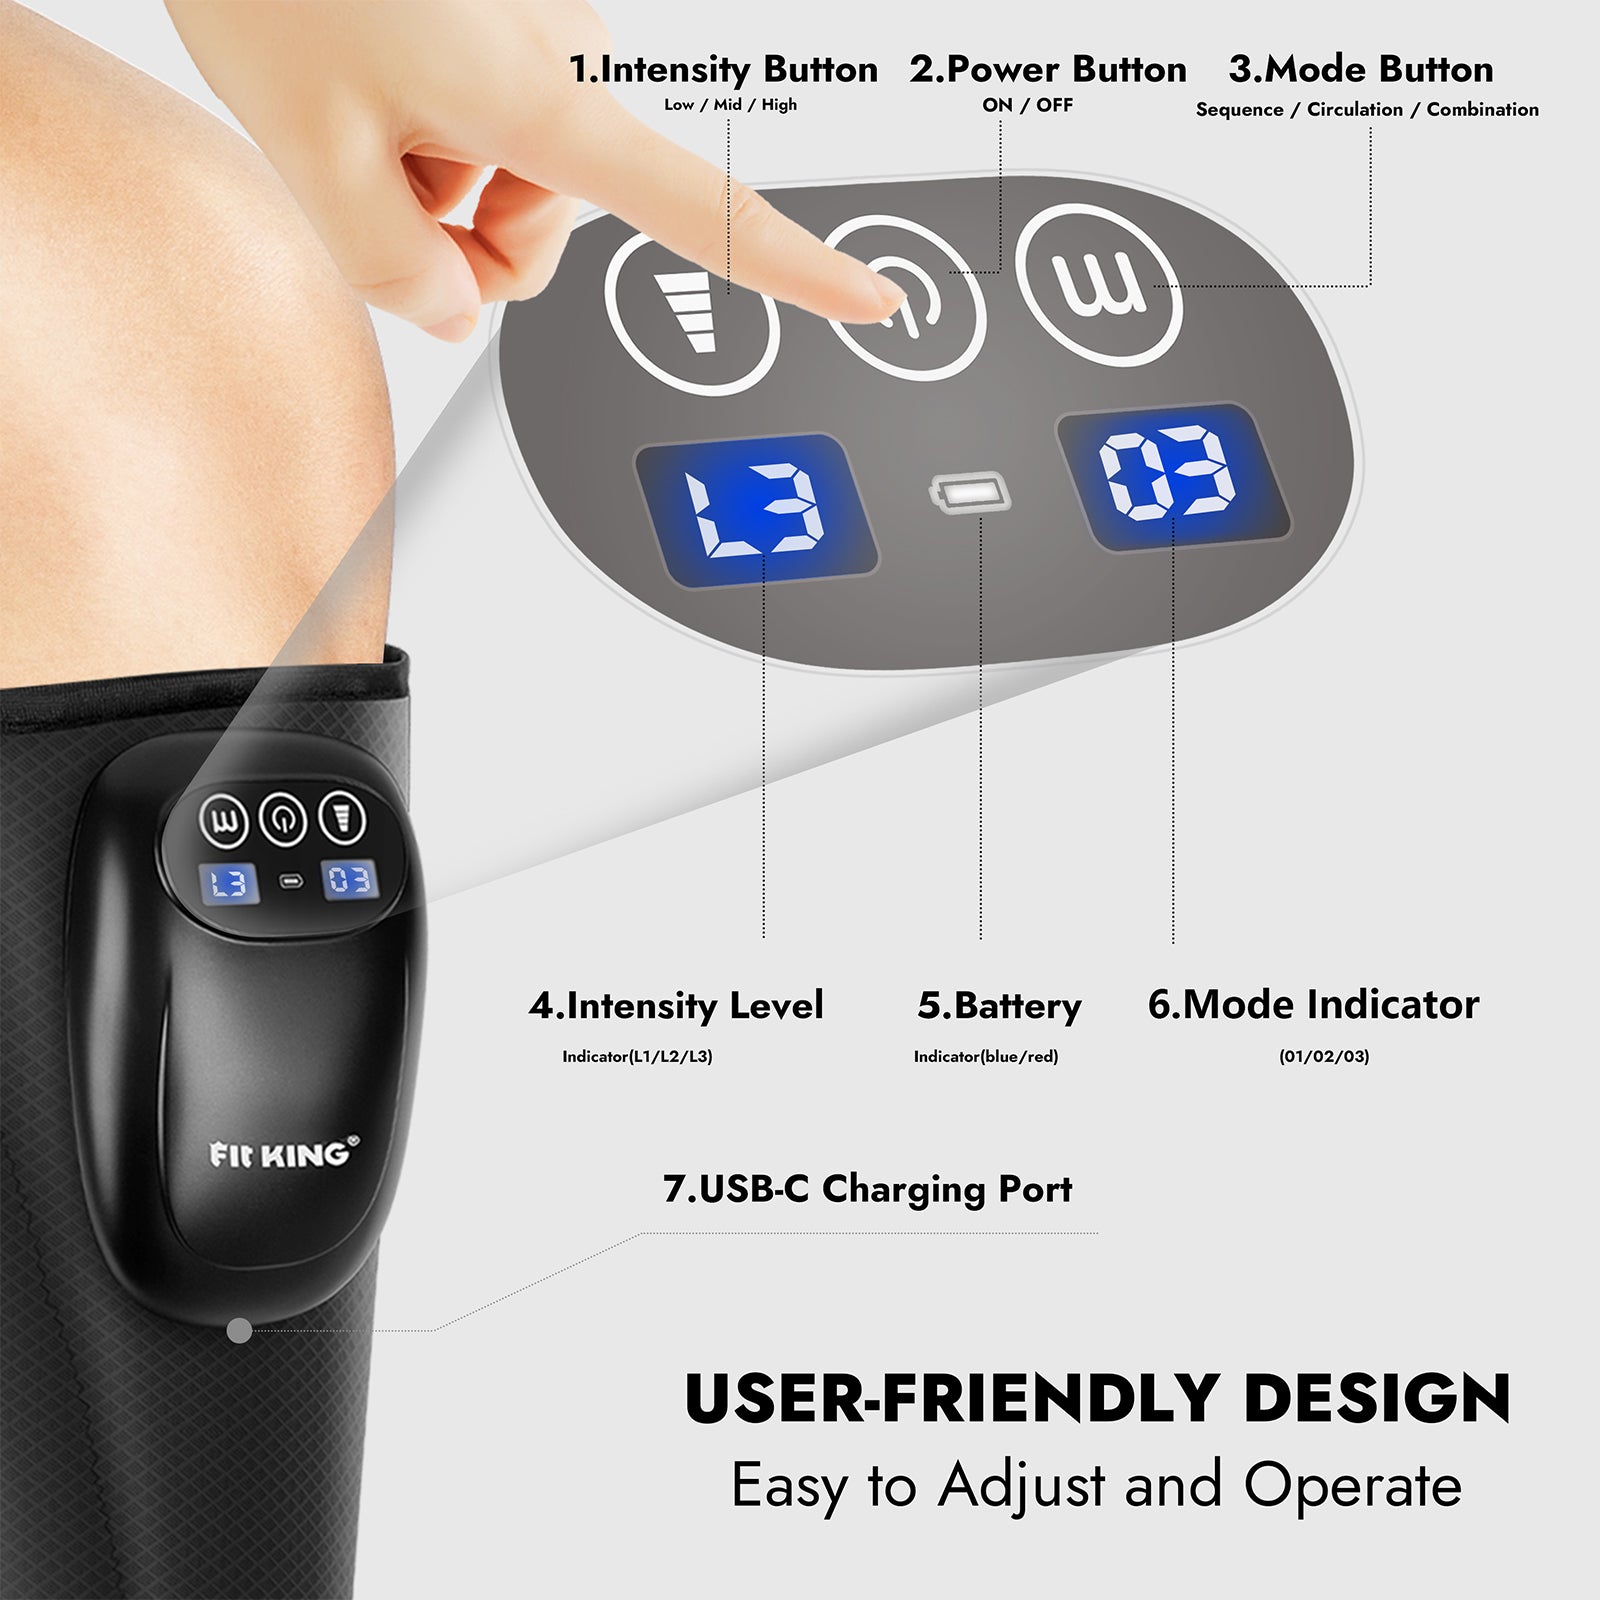 FIT KING Cordless Leg Massager for On-the-Go Relief | FT-058A